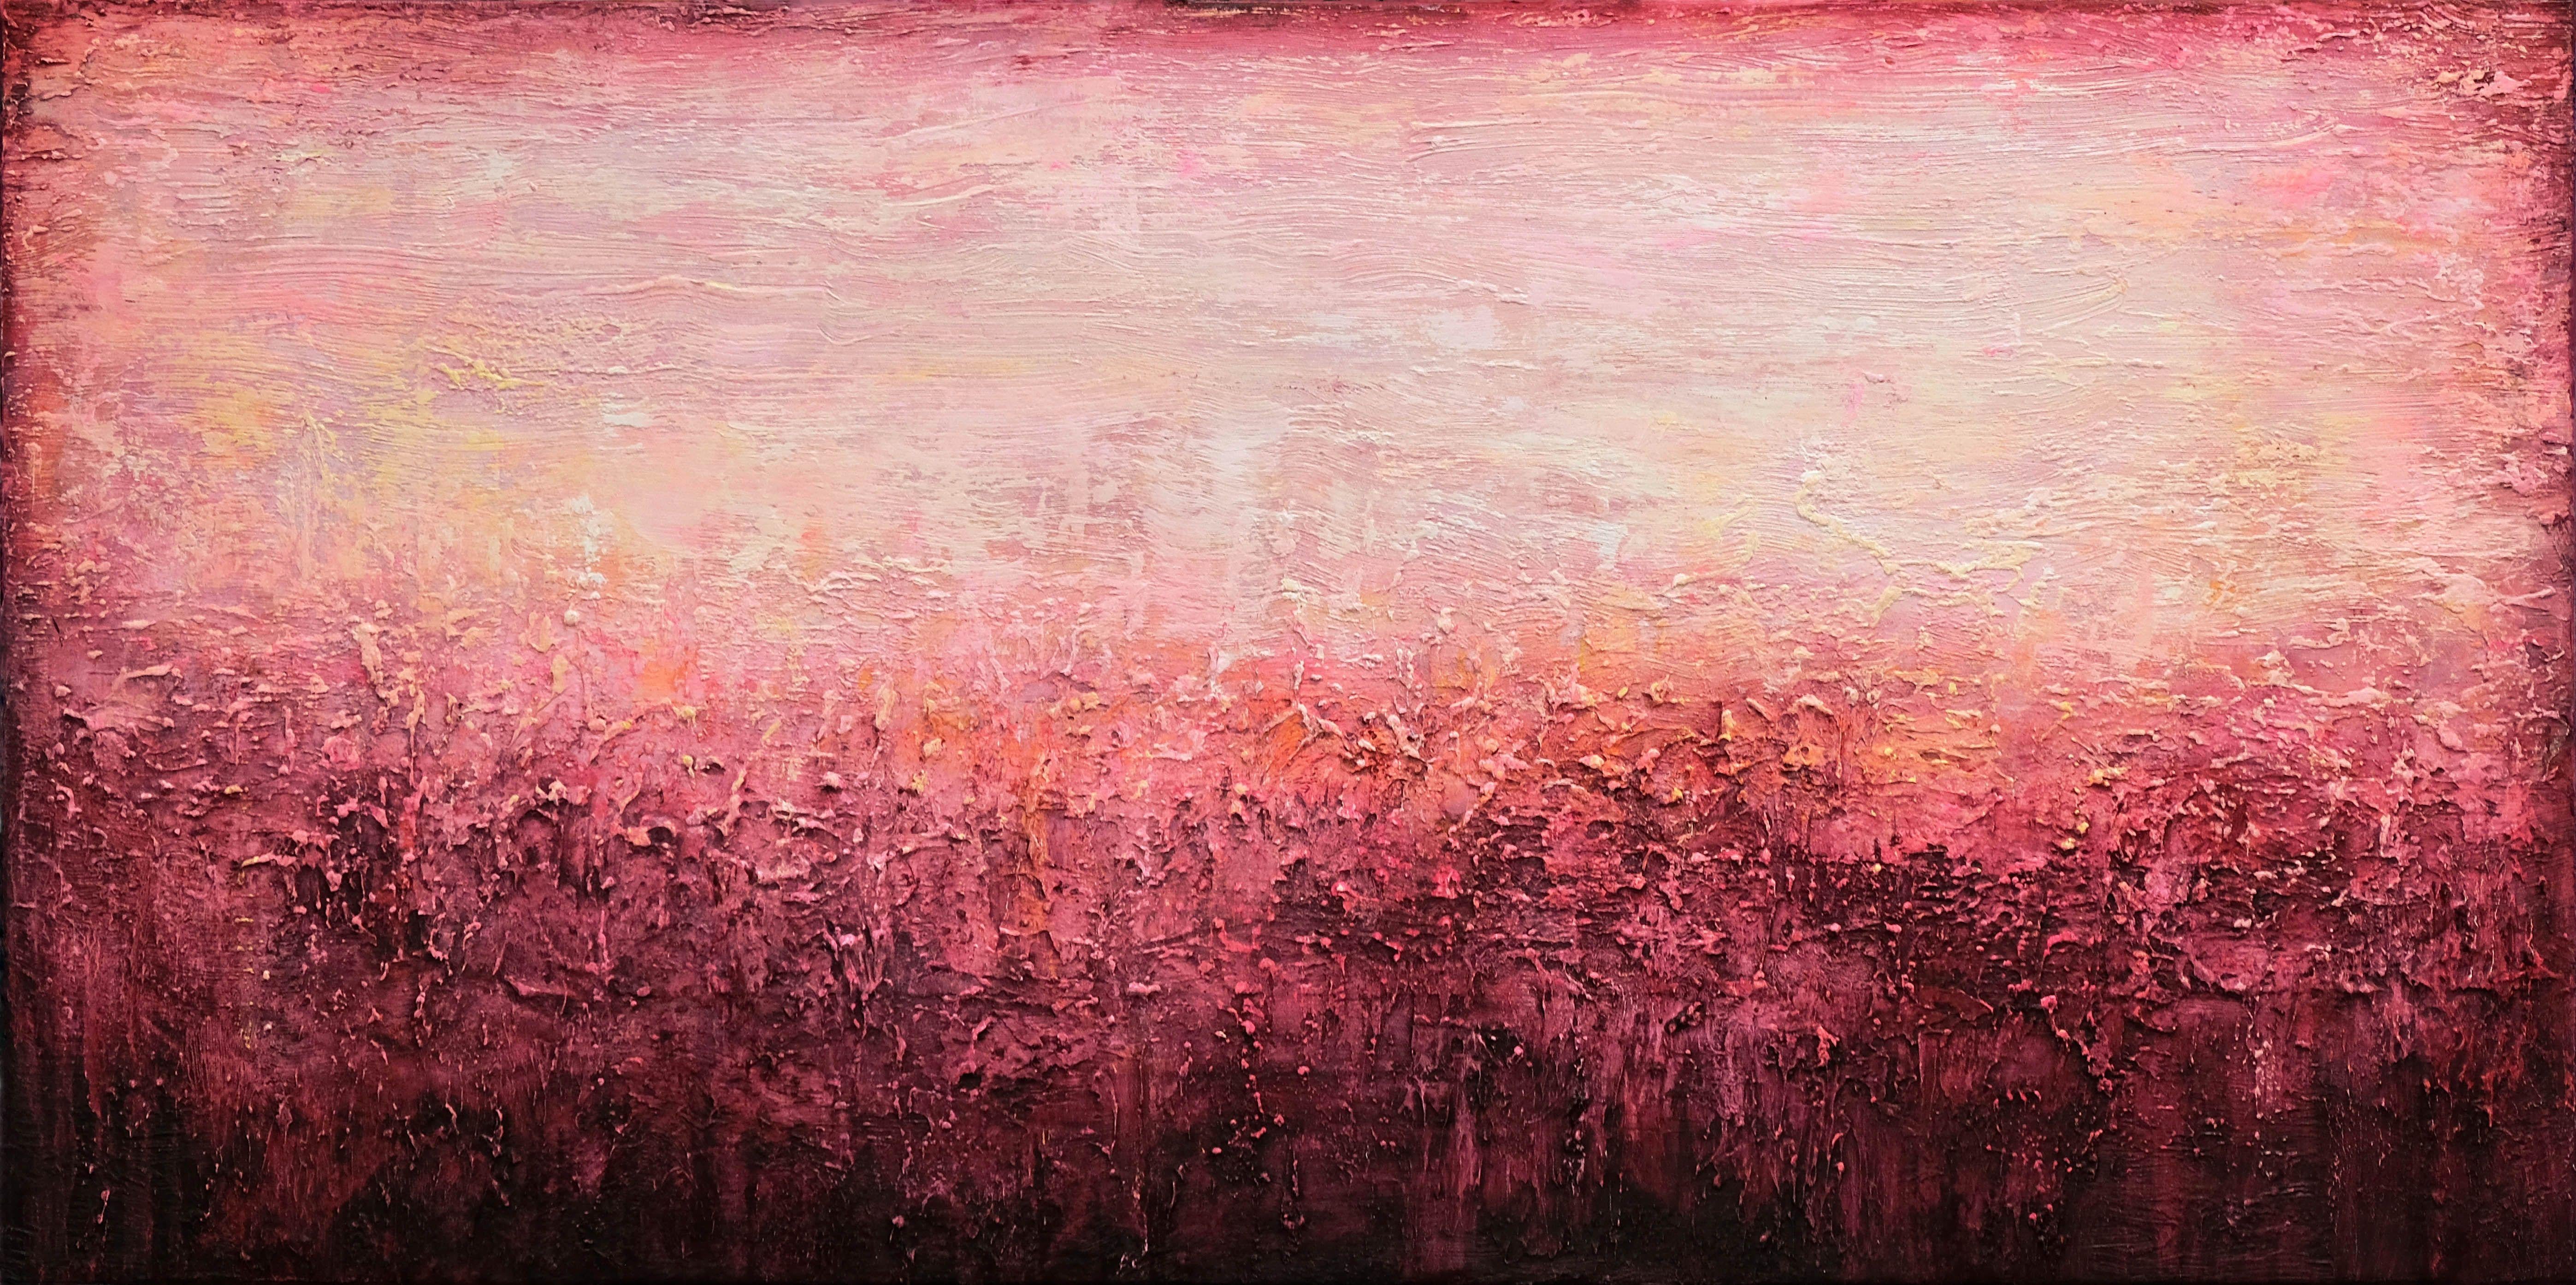 Abstract Sunset Landscape VIII, Painting, Oil on Canvas